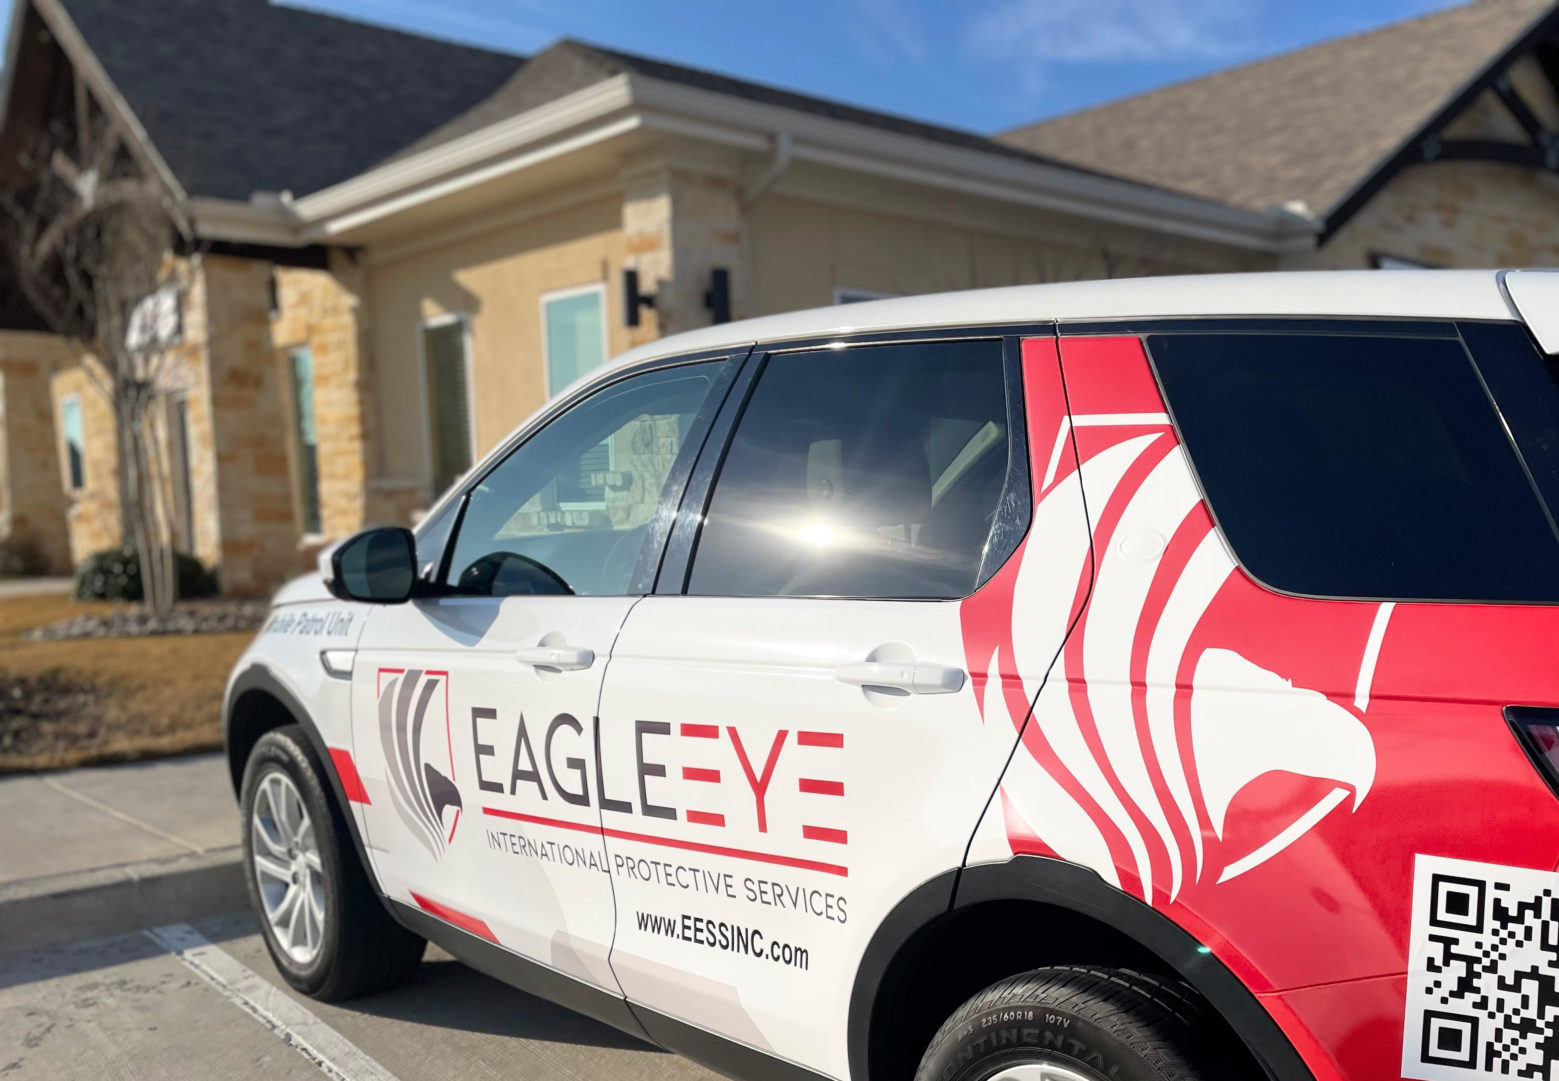 Eagle Eye Protective services Mobile patrol vehicle parked outside of a building